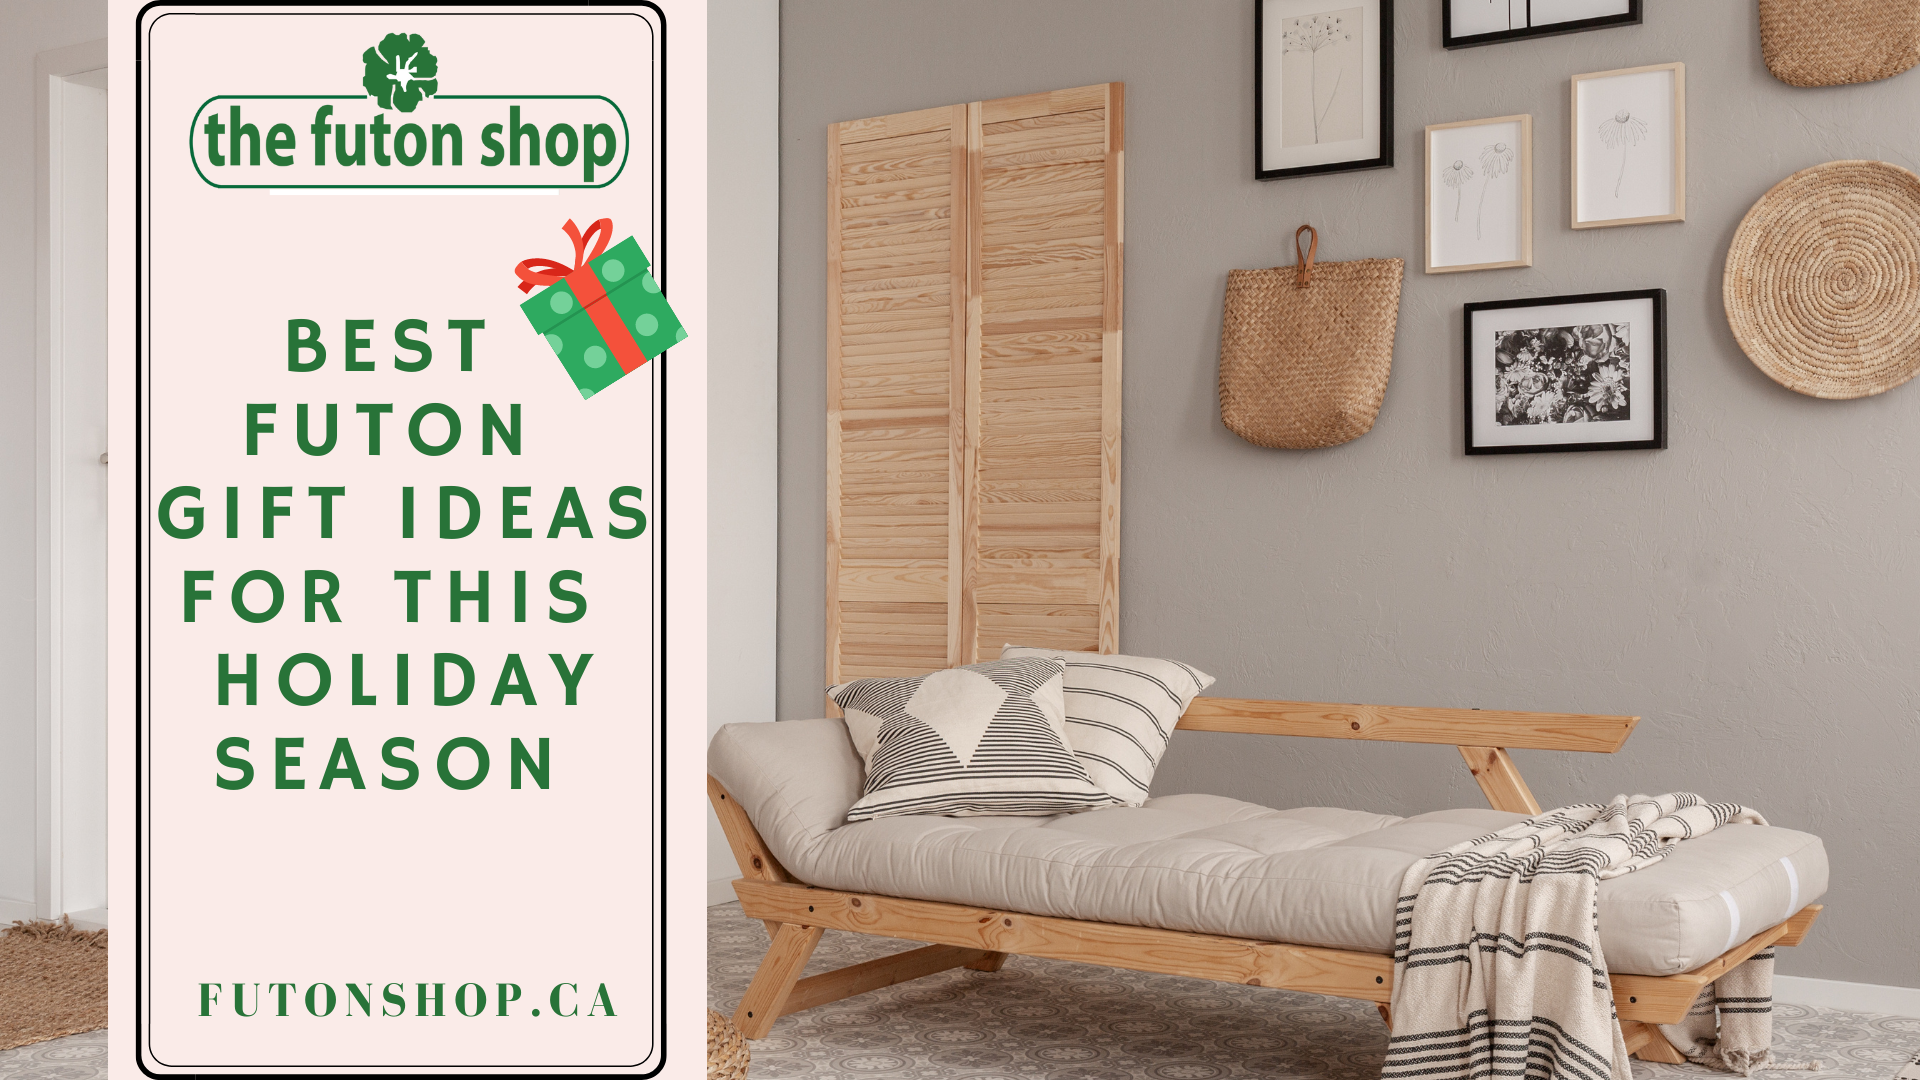 the futon shop offers the best futon gift ideas for this holiday season